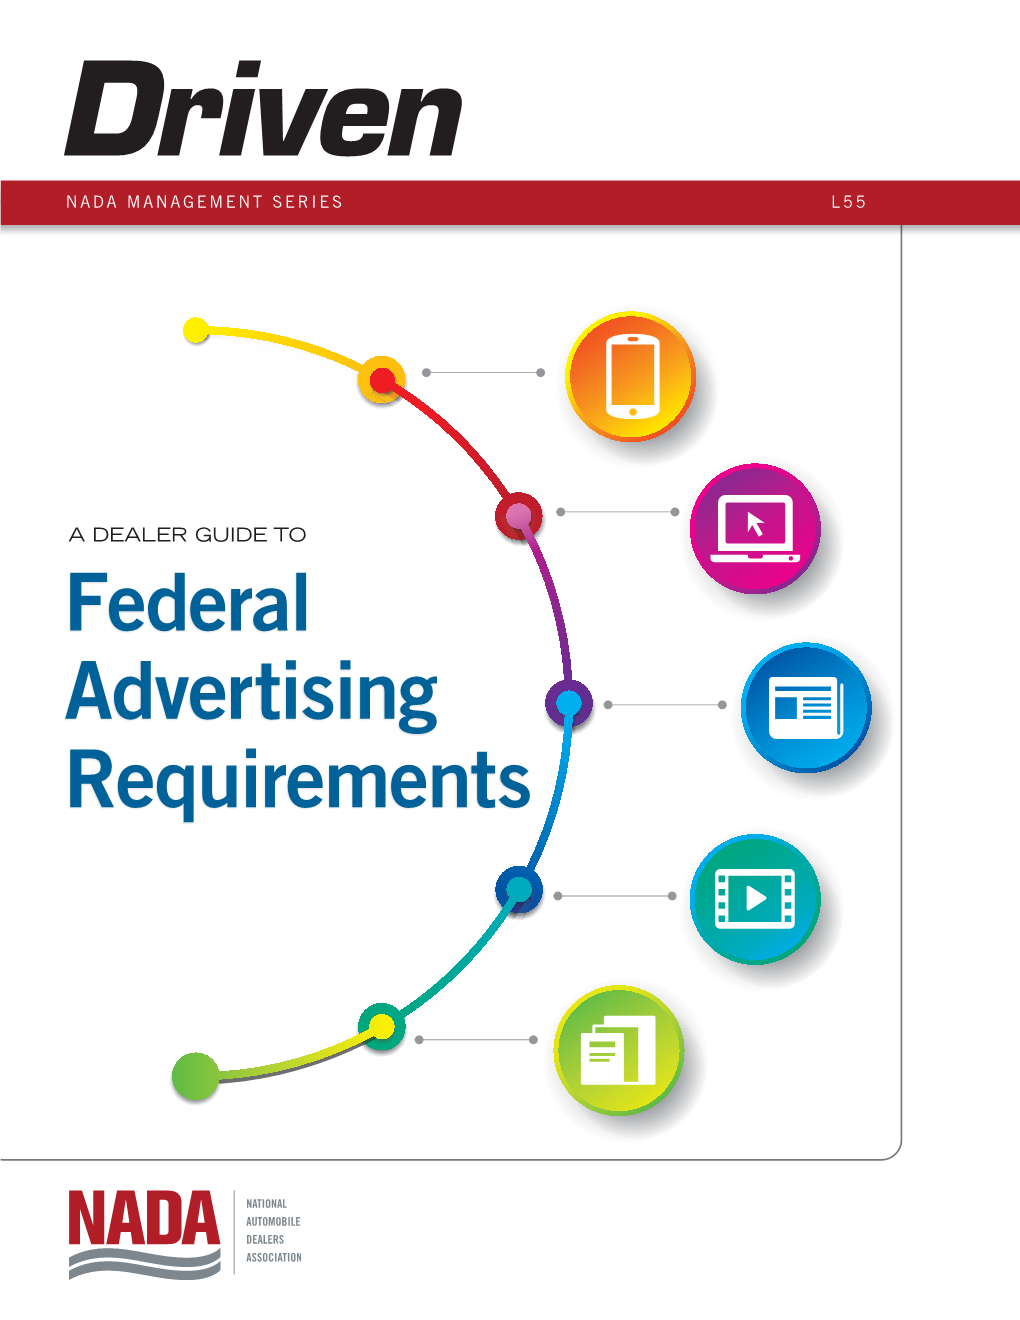 A Dealer Guide to Federal Advertising Requirements